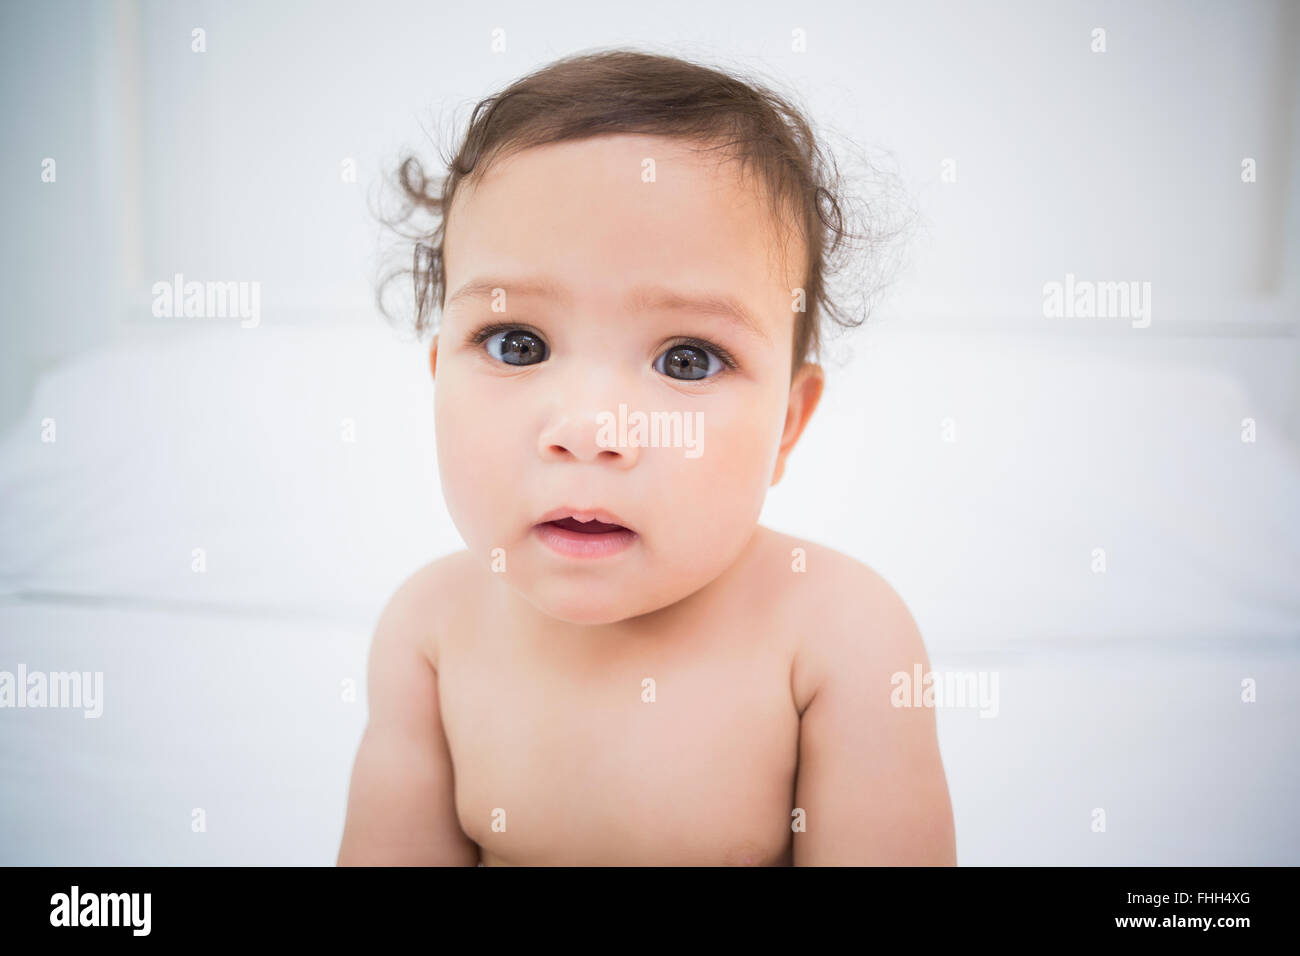 Cute baby girl on bed Banque D'Images